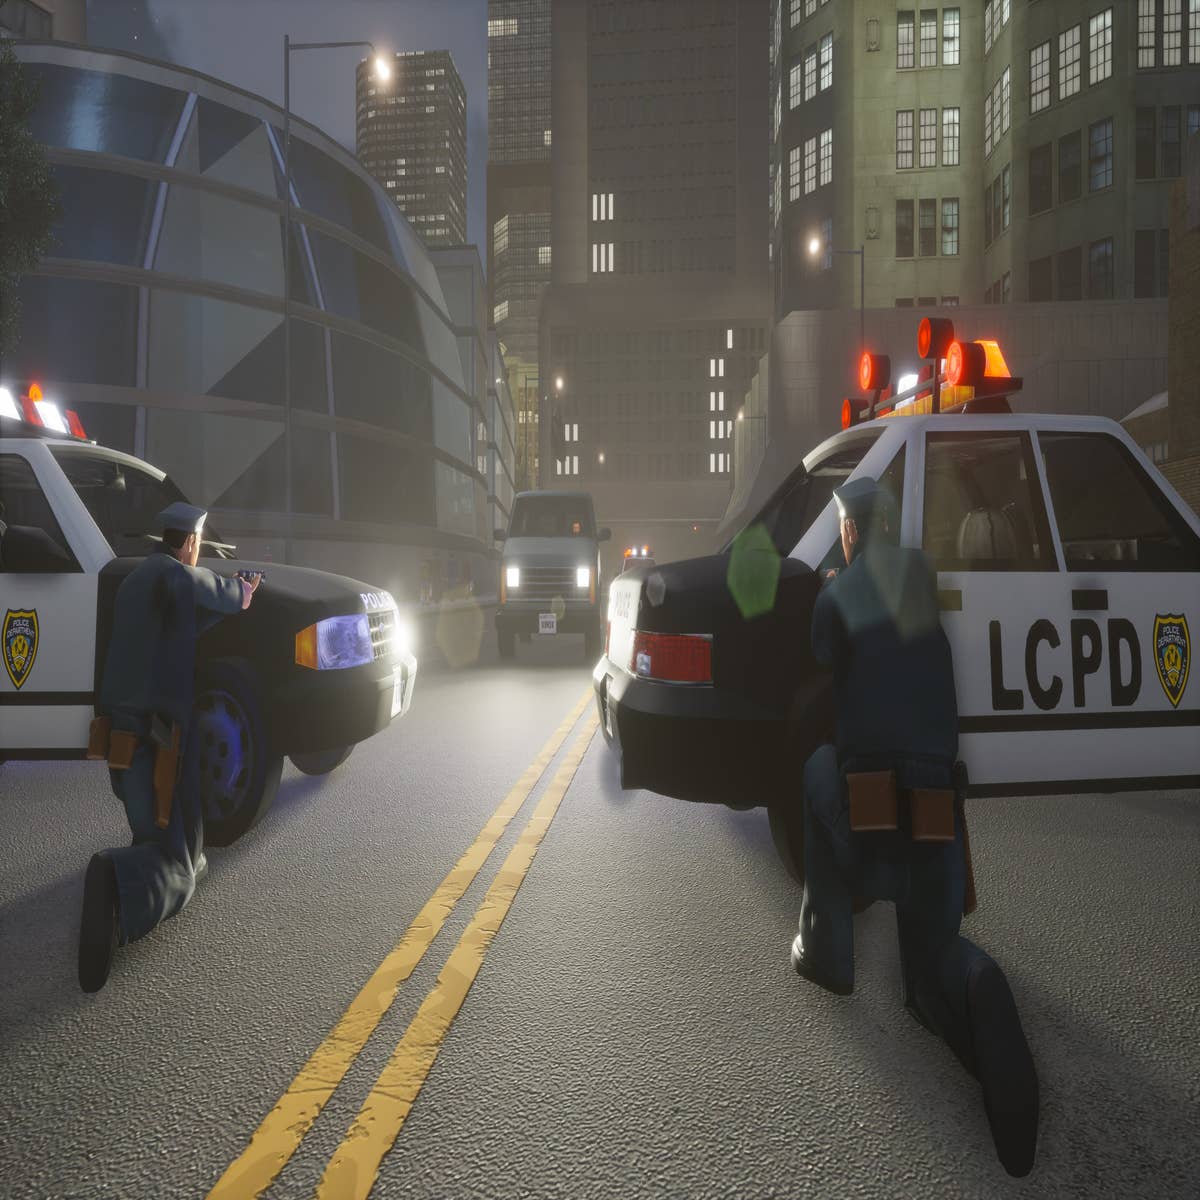 GTA Trilogy Definitive Edition - Despite Rockstar's legal persecution, once  again the modding community saves the day News - PC